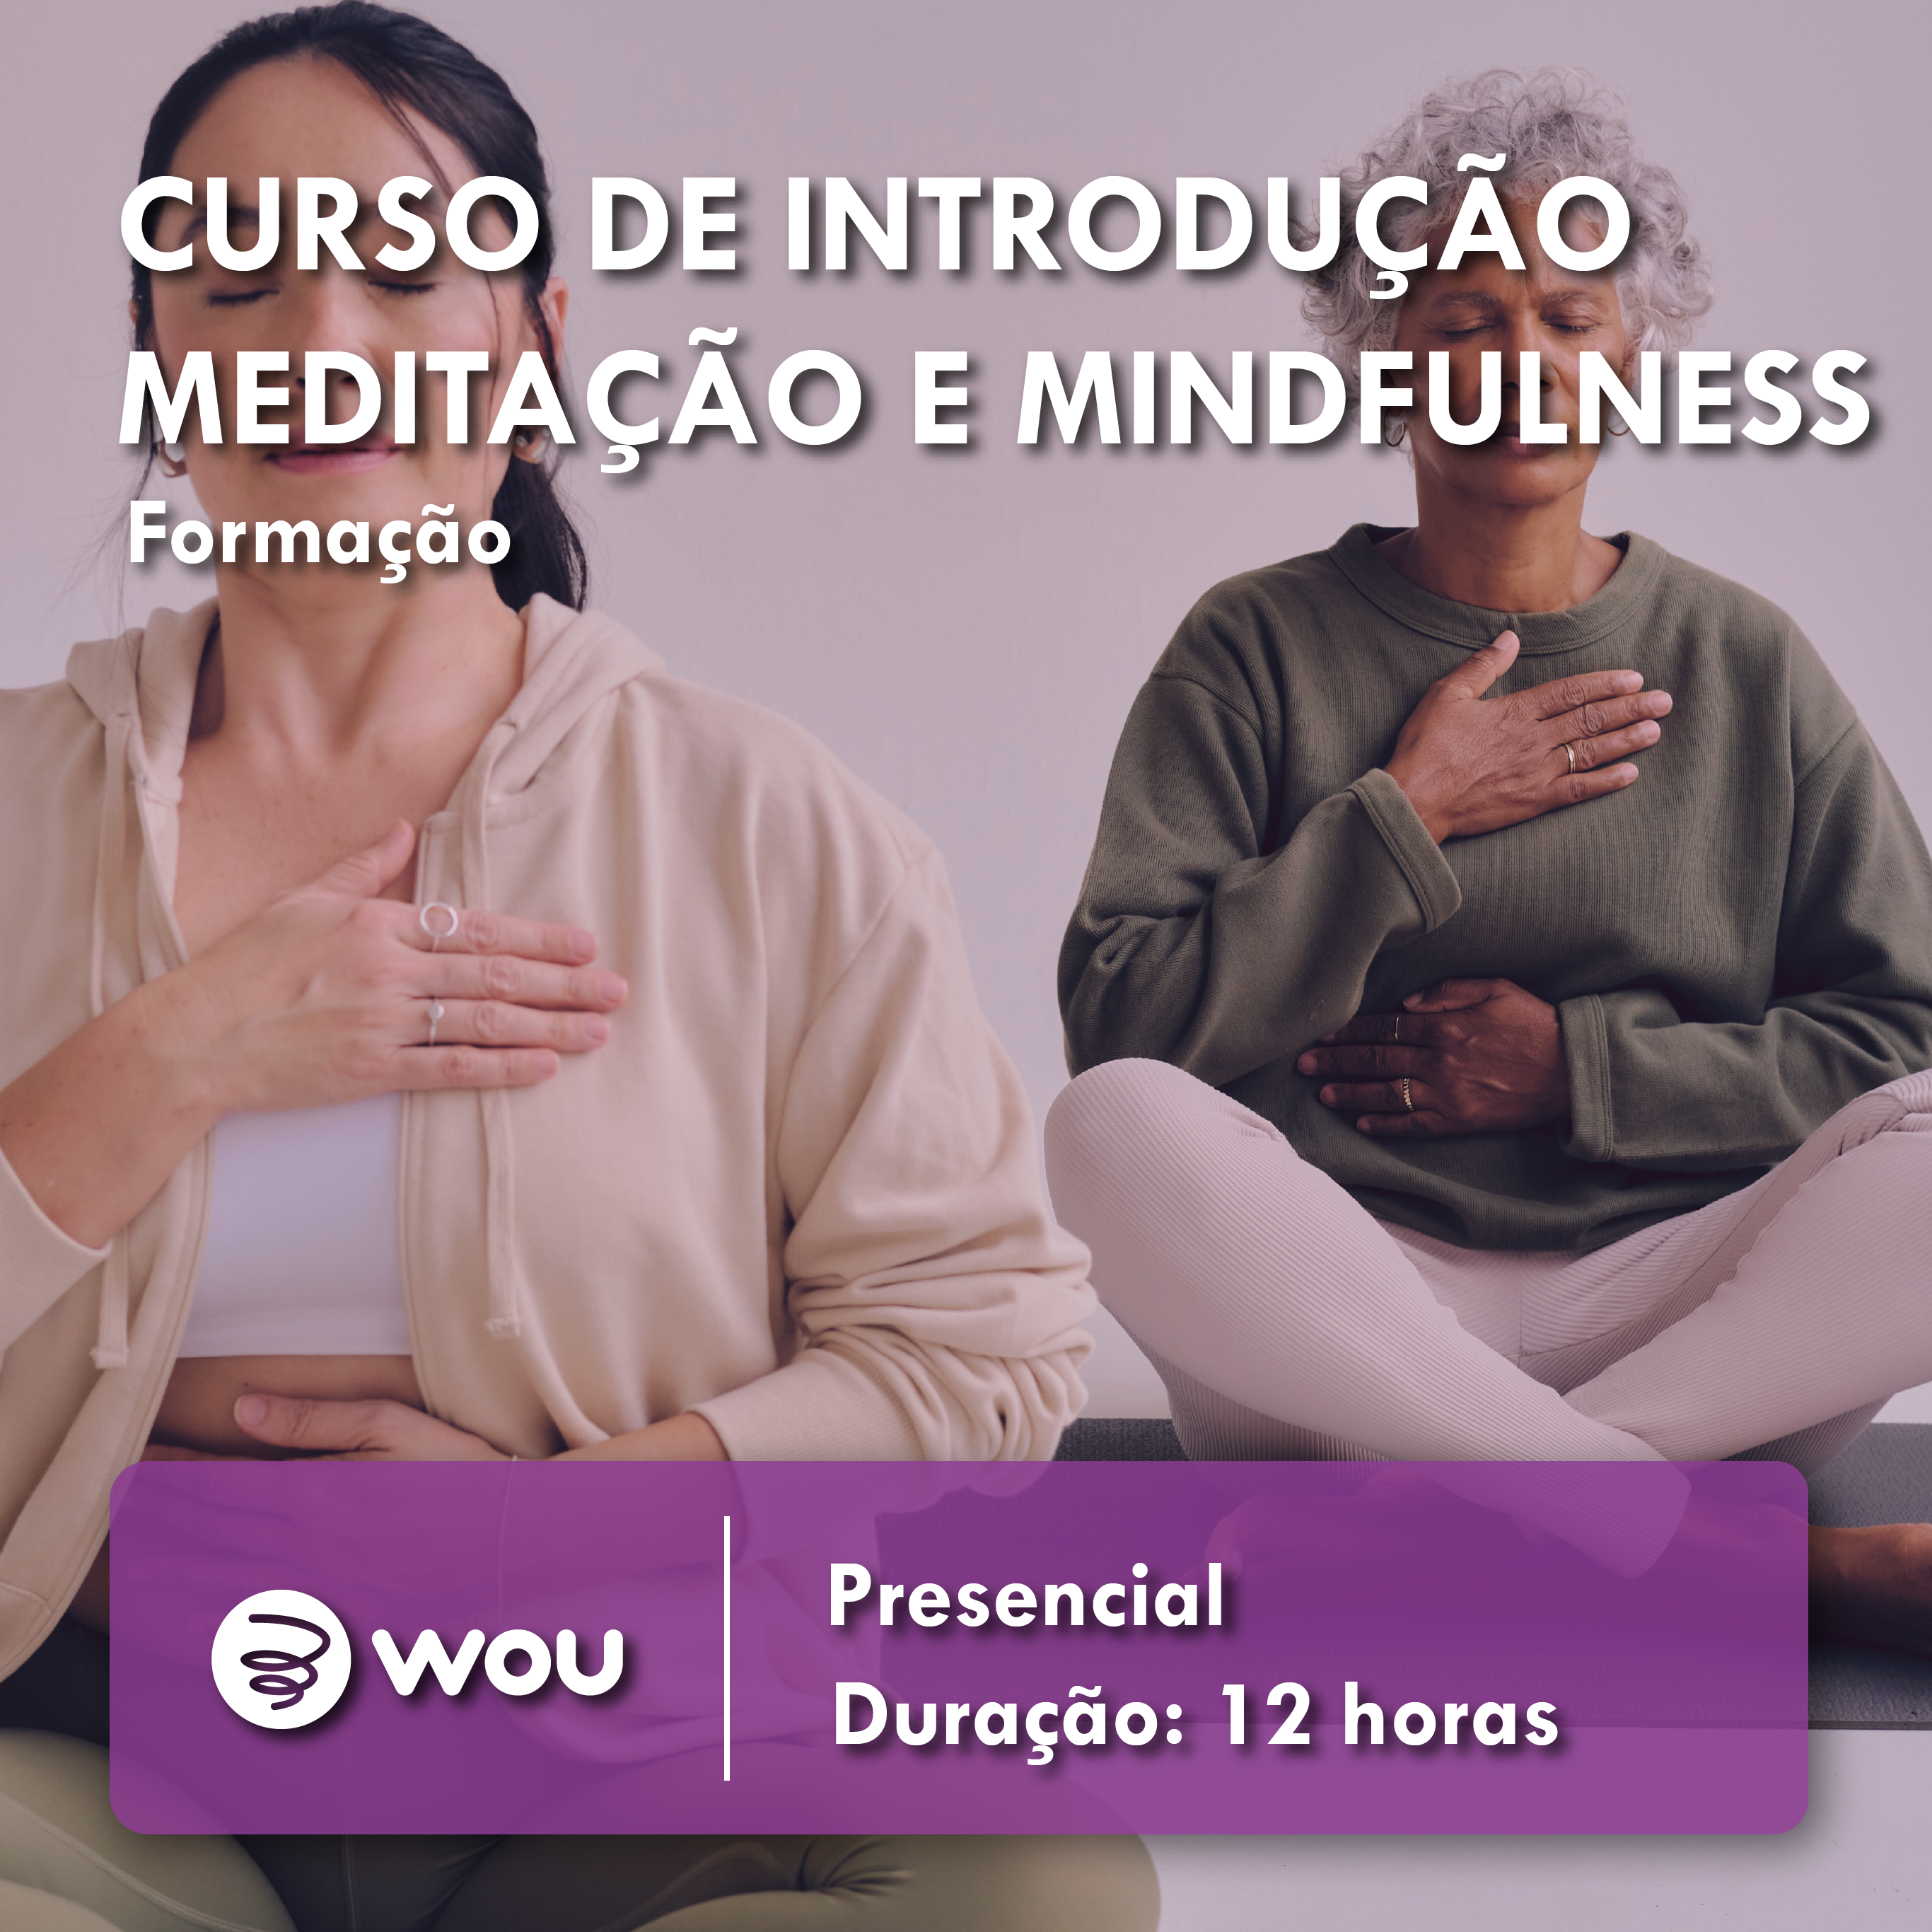 Introduction to Meditation and Mindfulness Course in Porto